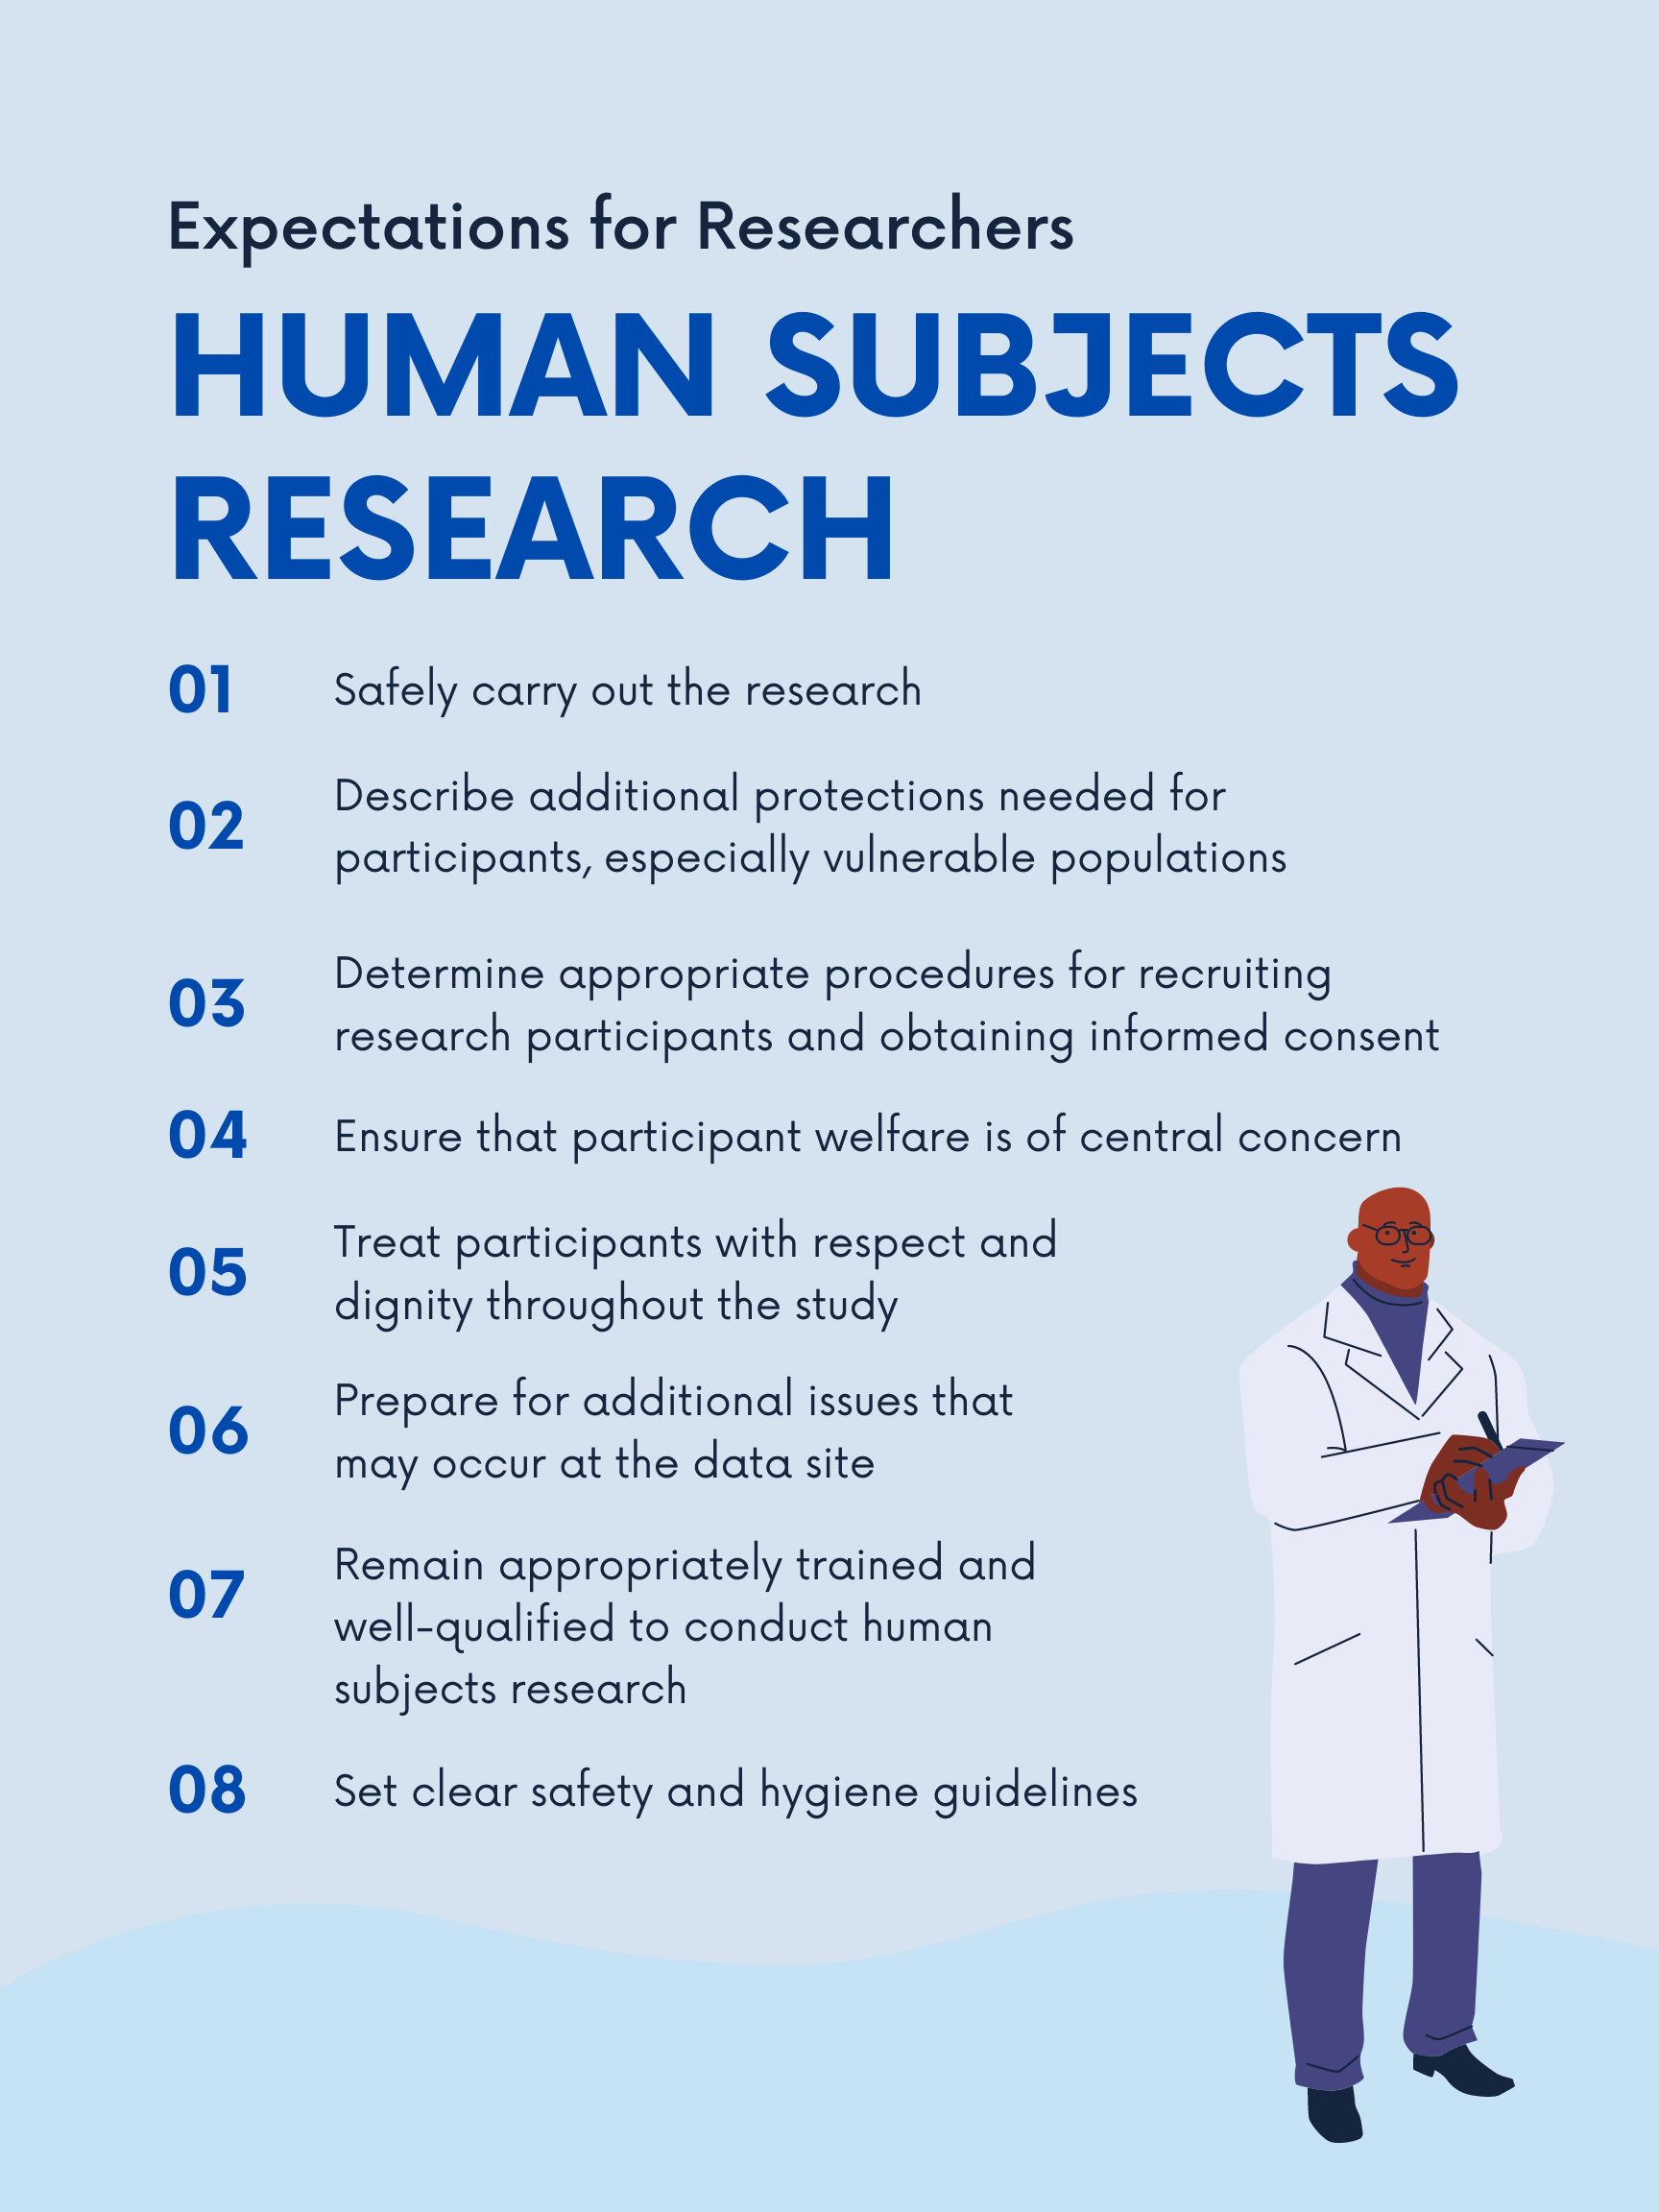 what reviews research that involves the use of human participants